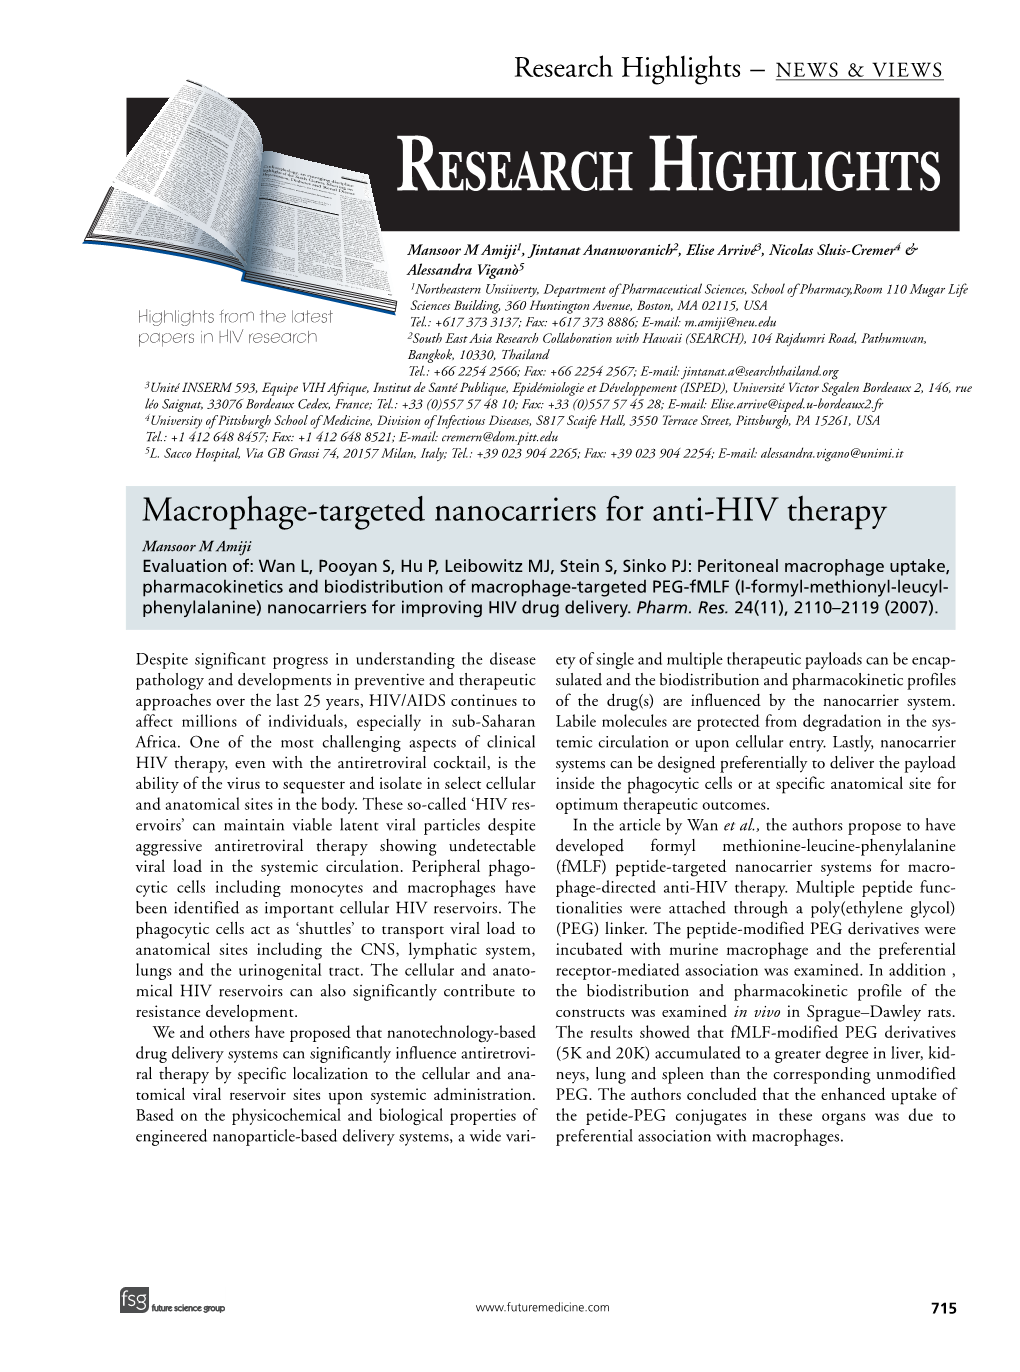 Macrophage-Targeted Nanocarriers for Anti-HIV Therapy